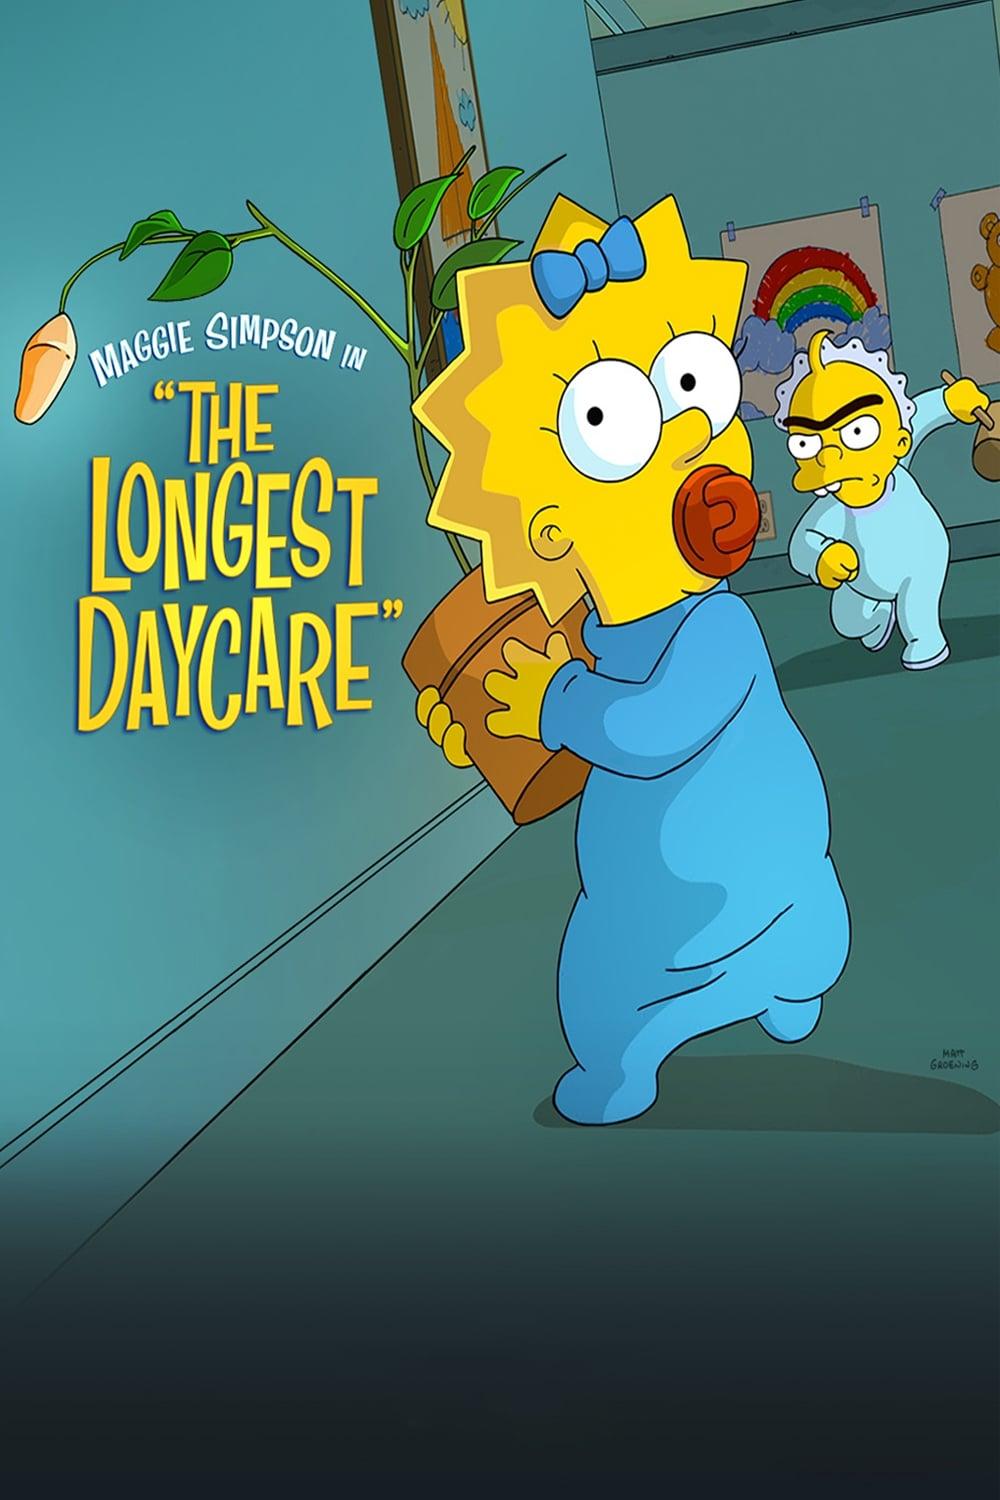 Maggie Simpson in "The Longest Daycare" poster